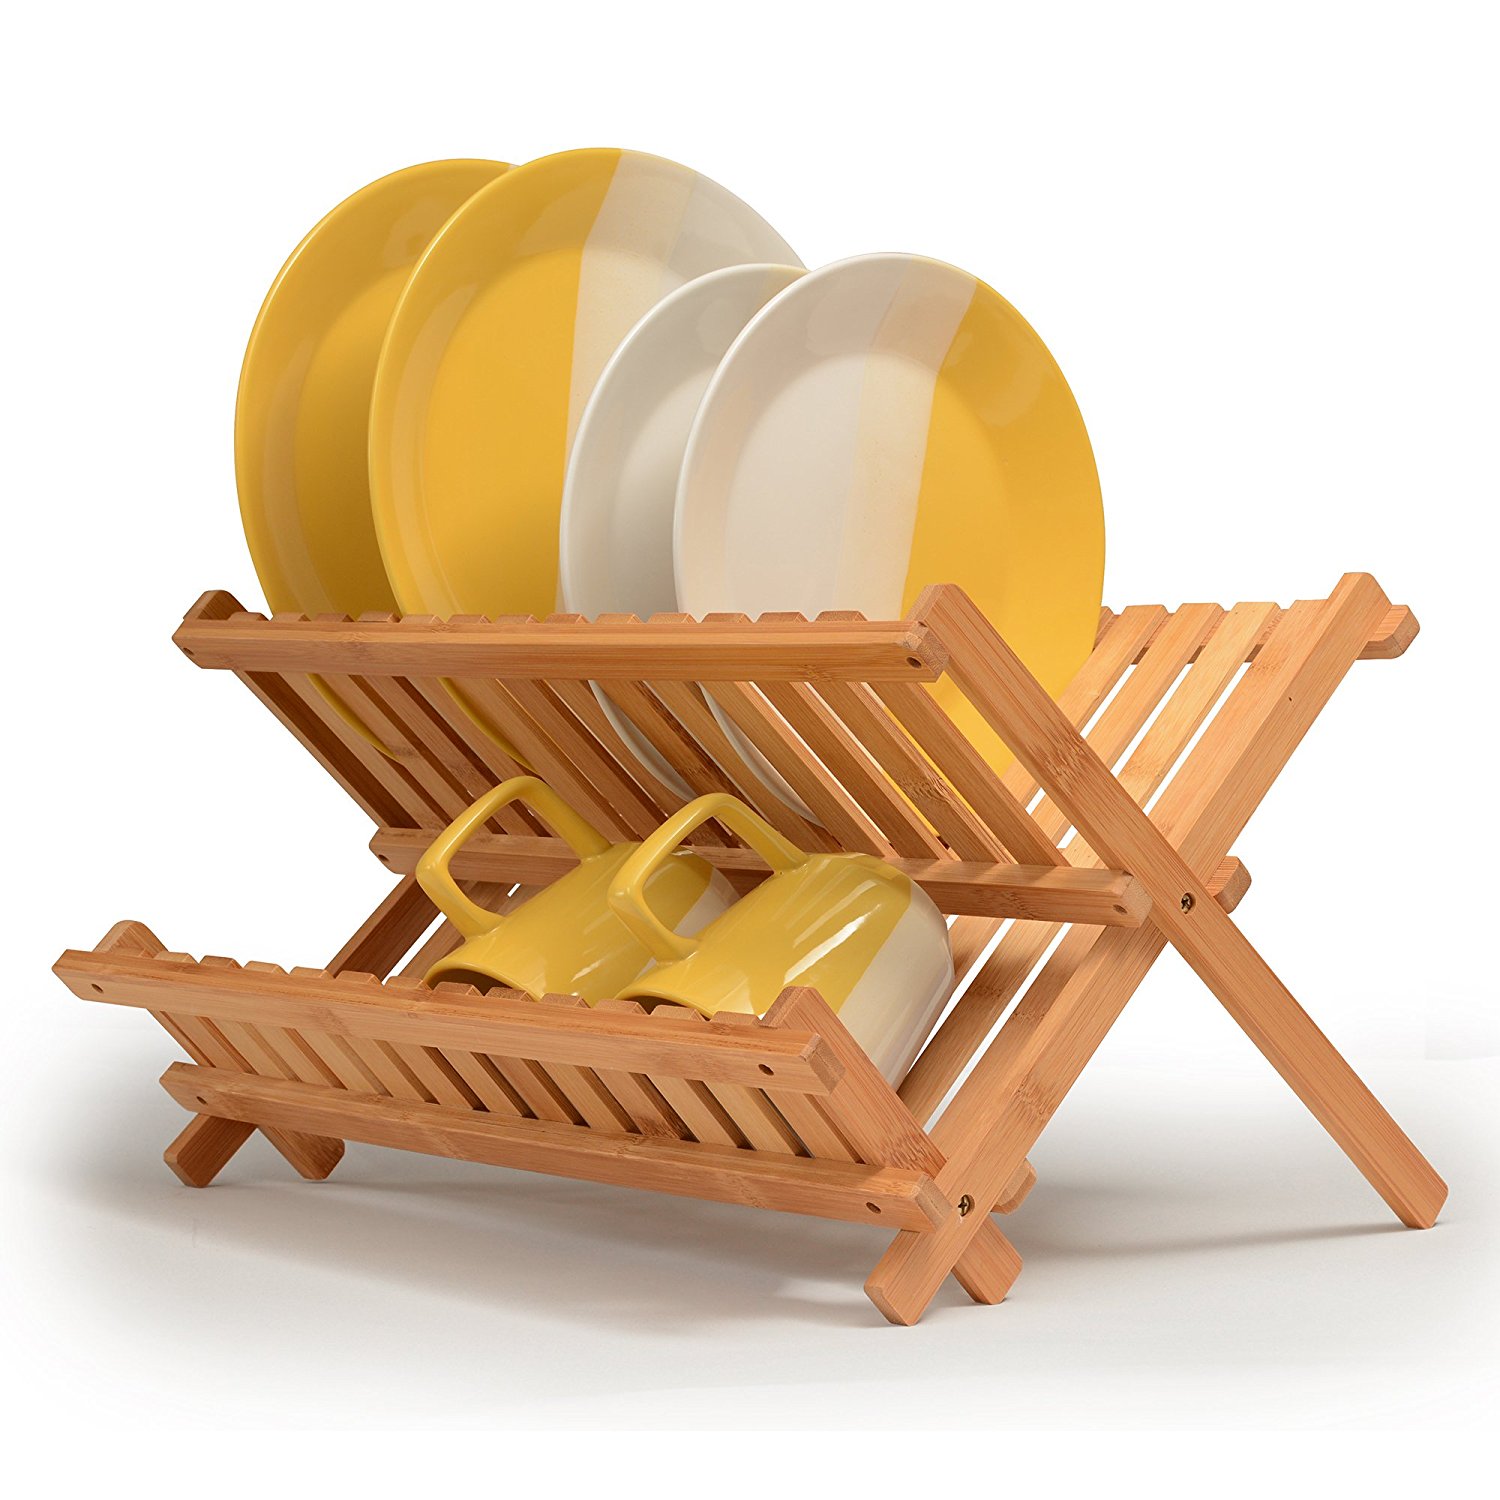 Bamboo Dish Rack Foldable Drying Collapsible Dish Drainer Wooden Plate Rack - image 1 of 7